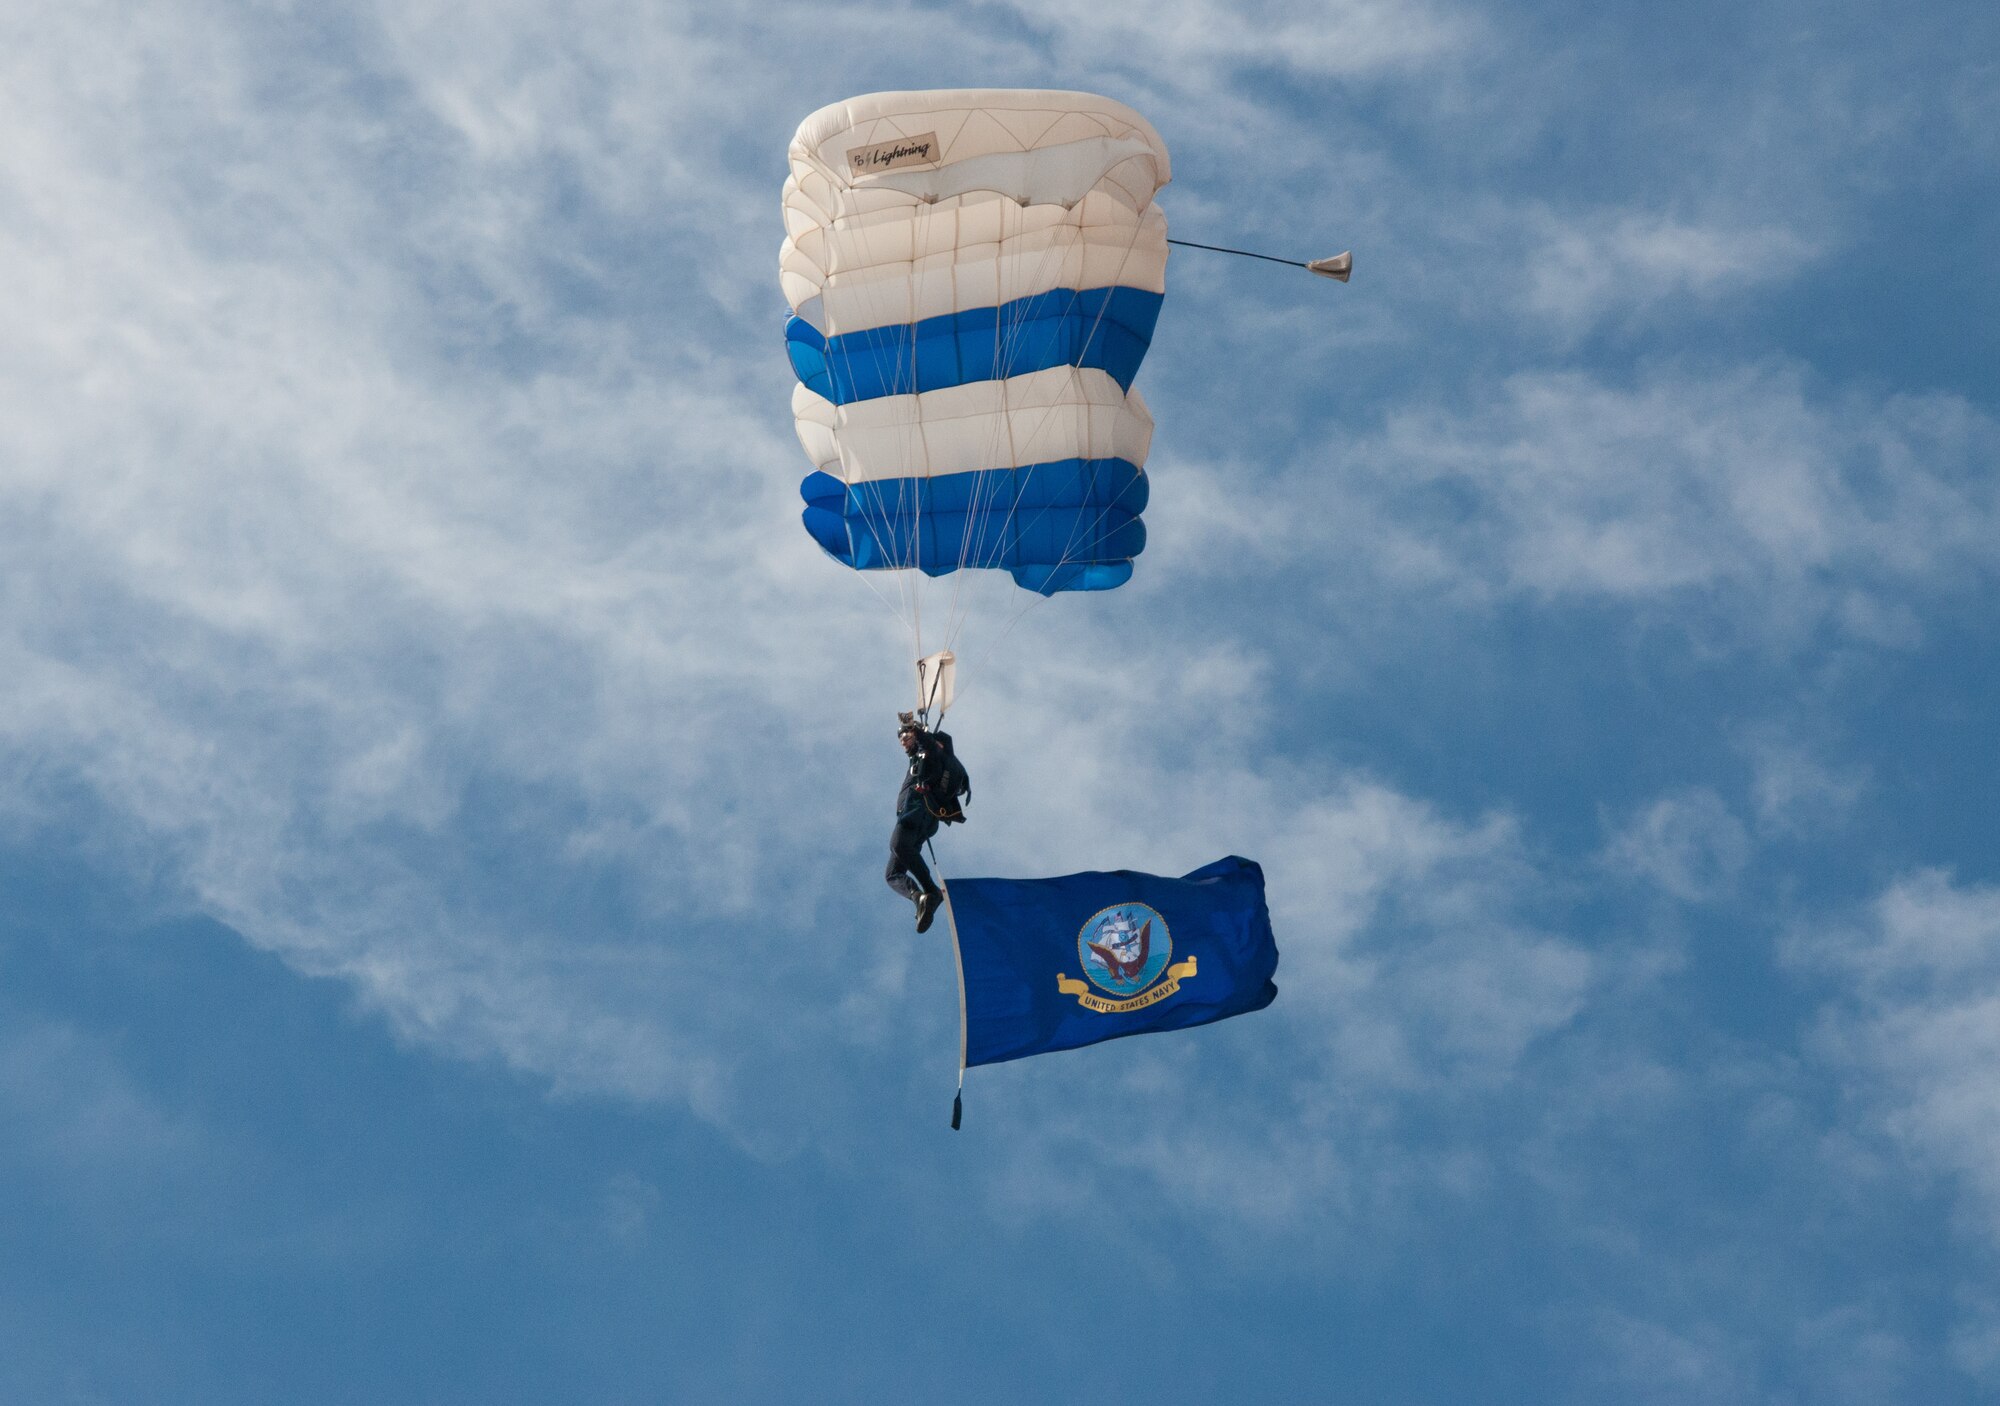 NAVAL AIR STATION FORT WORTH JOINT RESERVE BASE, Texas - A member of the Wings of Blue, the Air Force's skydiving team, descended into the Amon G. Stadium, Fort Worth, Texas Dec. 29 waving the U.S. Navy flag during the 2015 Armed Forces Bowl. The U.S. Air Force Academy and the University of California battled for the championship, but in the end the Bears beat the Falcons 55 to 36.(U. S. Air Force photo by Staff Sgt. Melissa Harvey) 